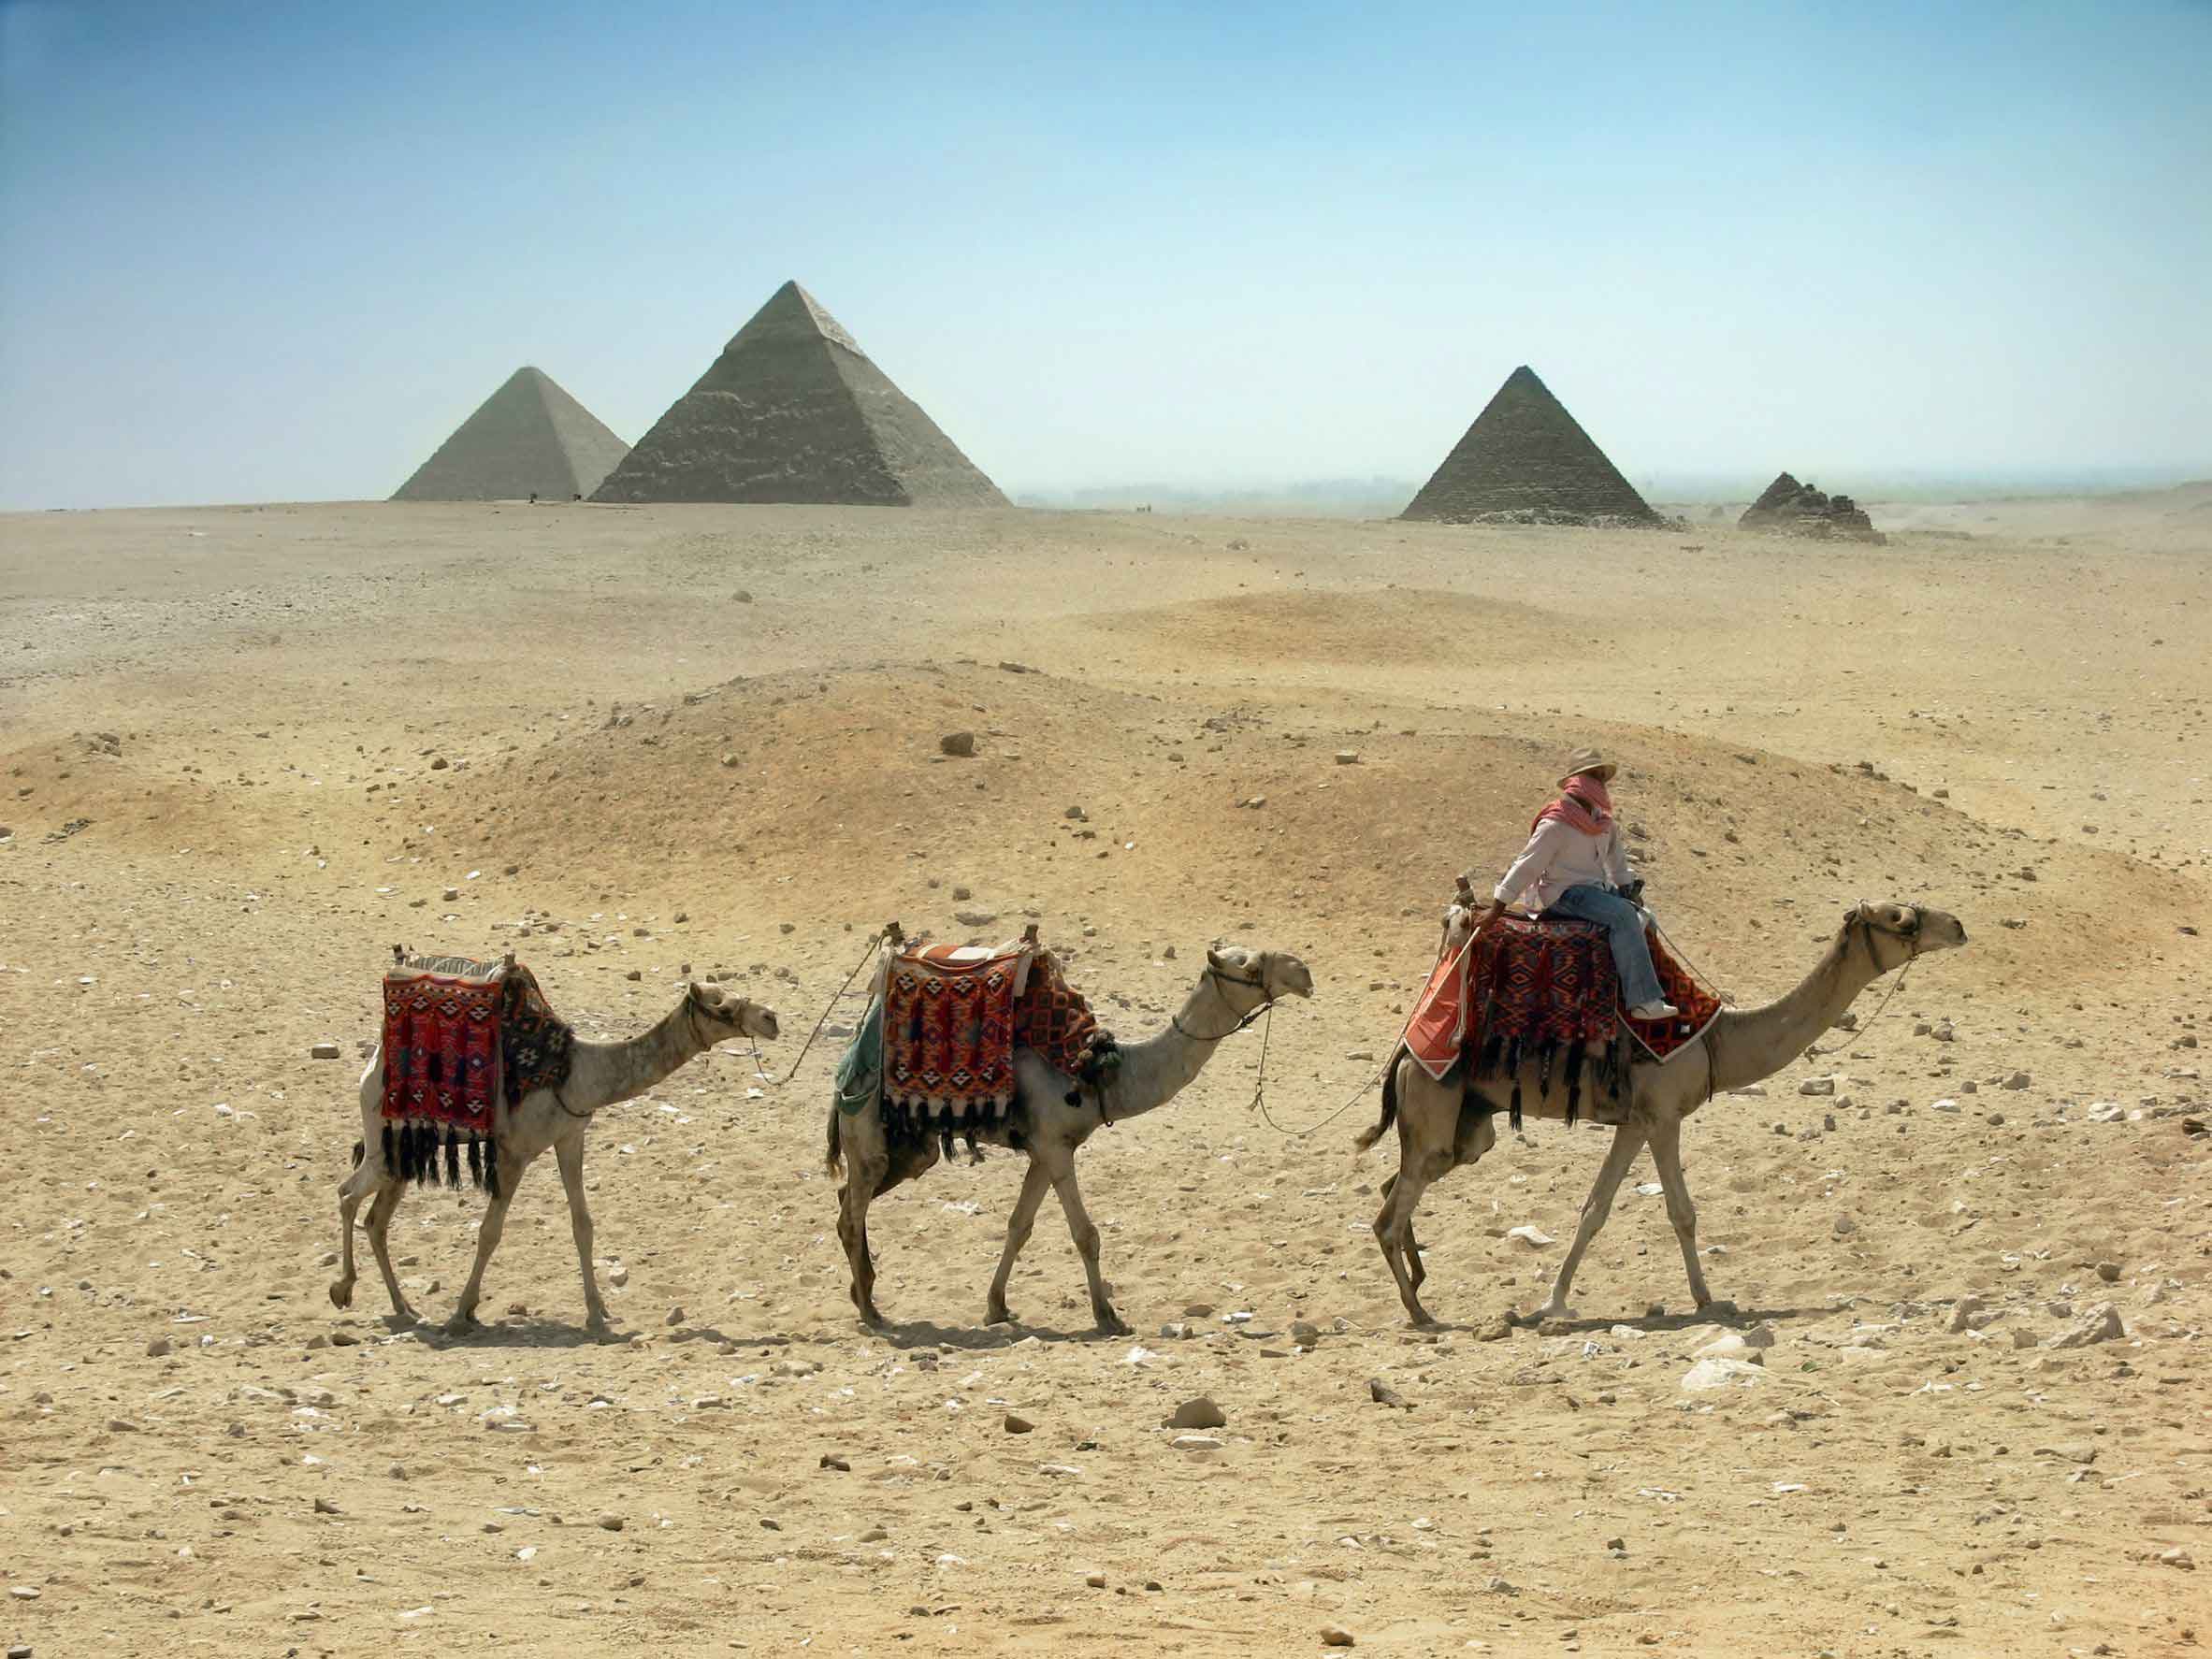 The great pyramids of Giza in Cairo, Egypt.